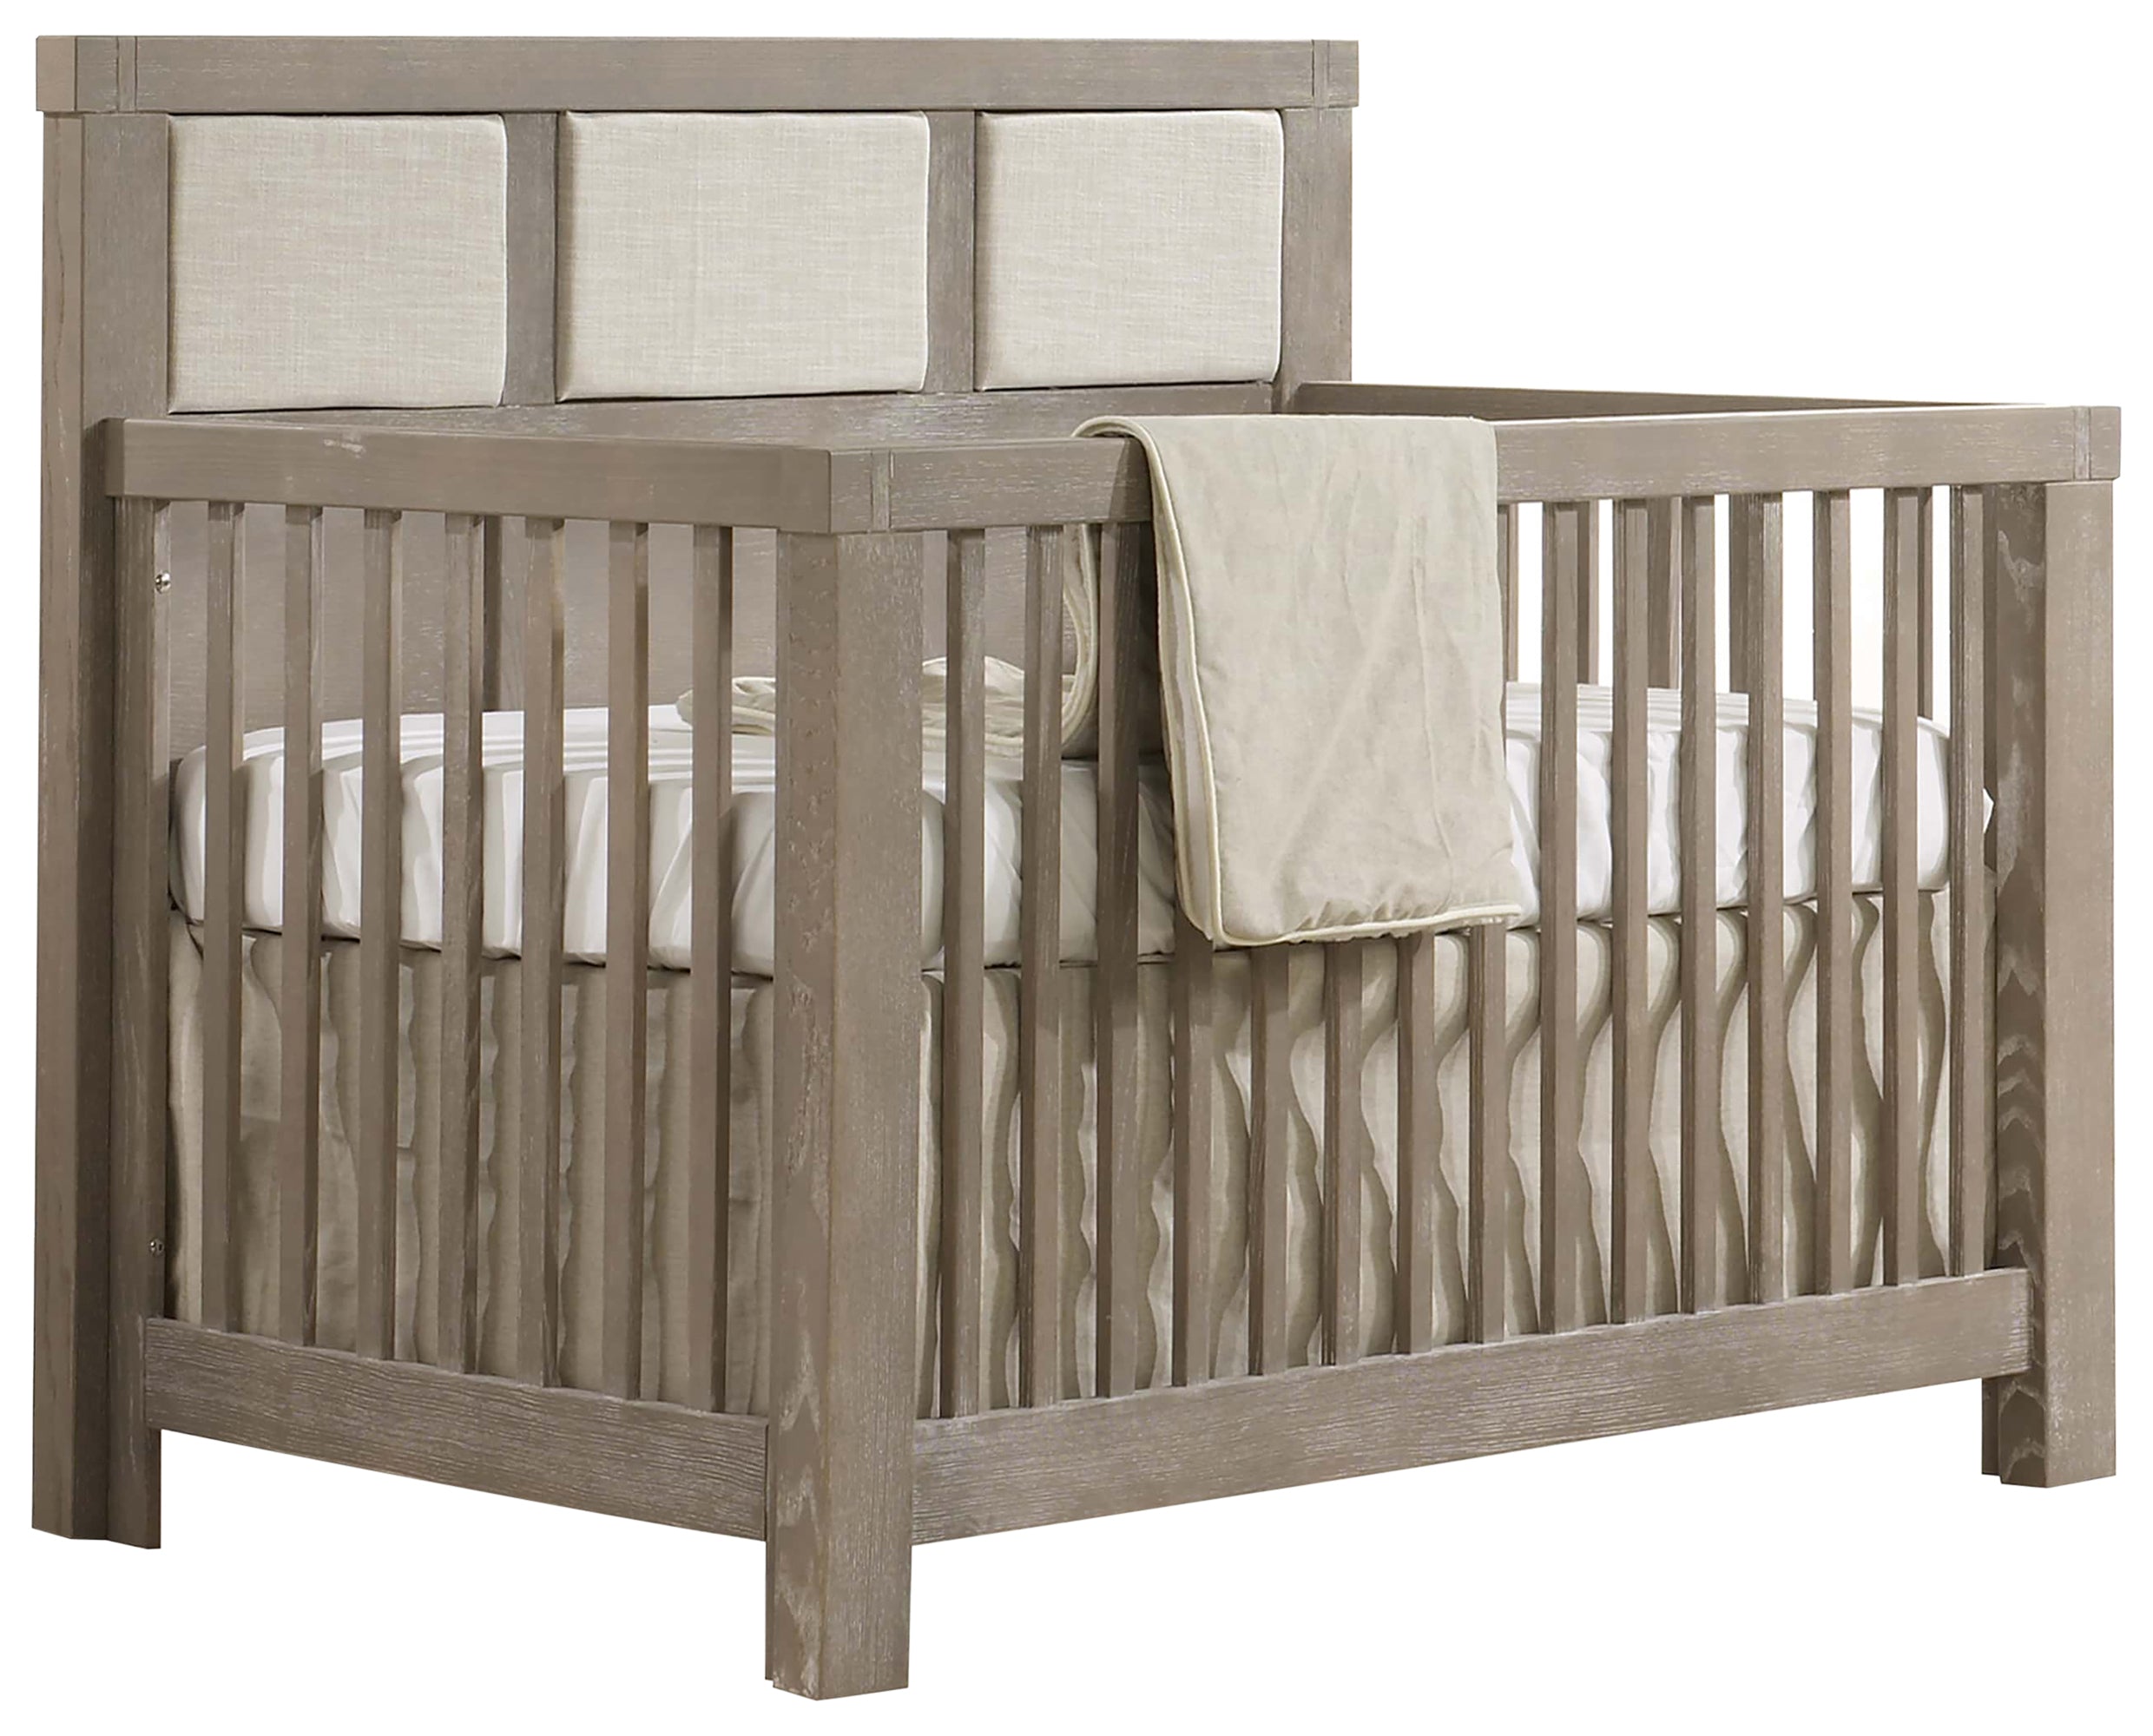 Sugar Cane Brushed Oak with Talc Fabric | Rustico 5-in-1 Convertible Crib w/Upholstered Headboard Panels | Valley Ridge Furniture